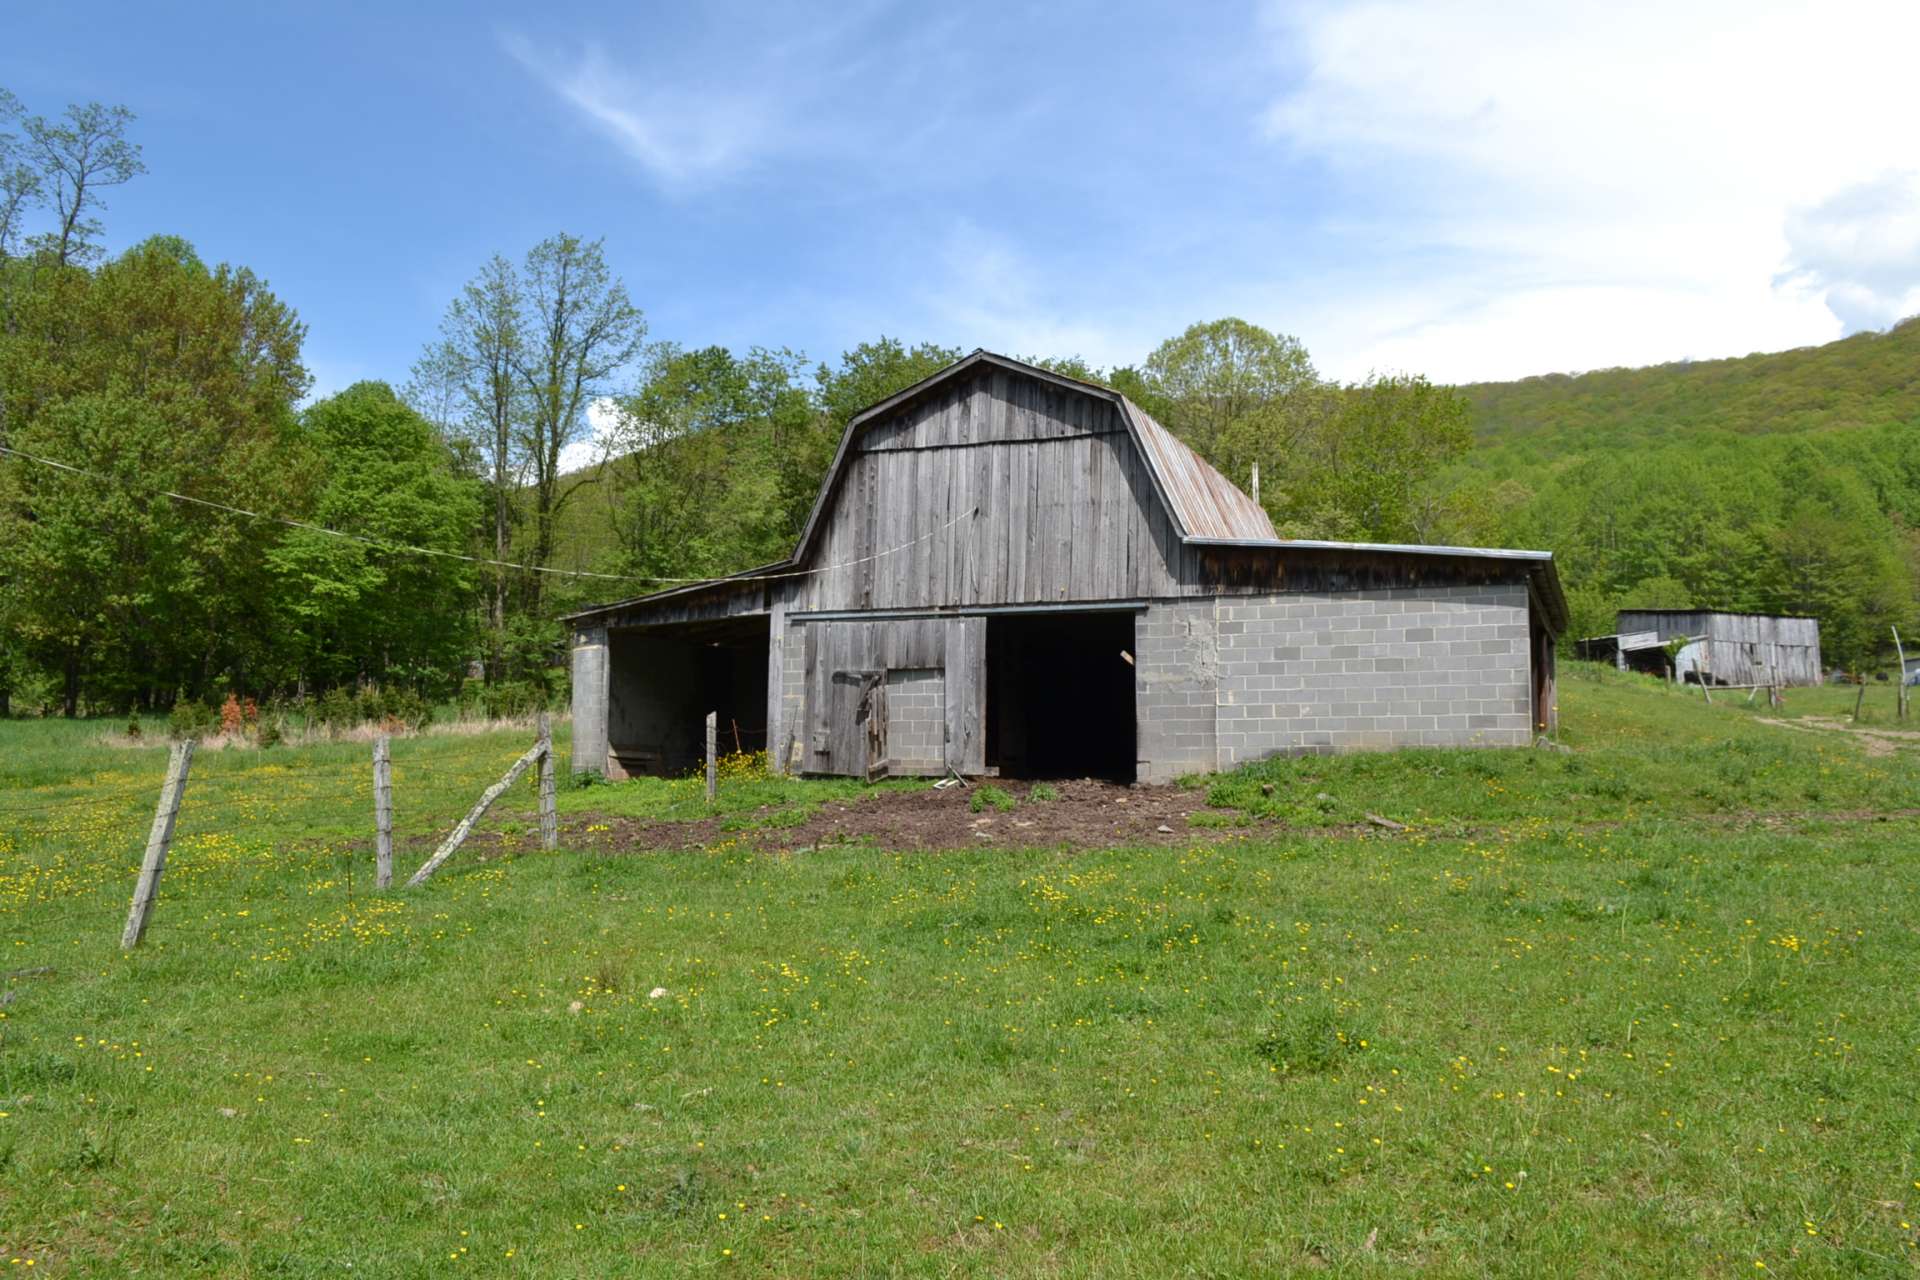 A large barn will be perfect for livestock, equipment storage, or crop harvest.  There is even a chicken coop and several other outbuildings essential for farm life in the country.